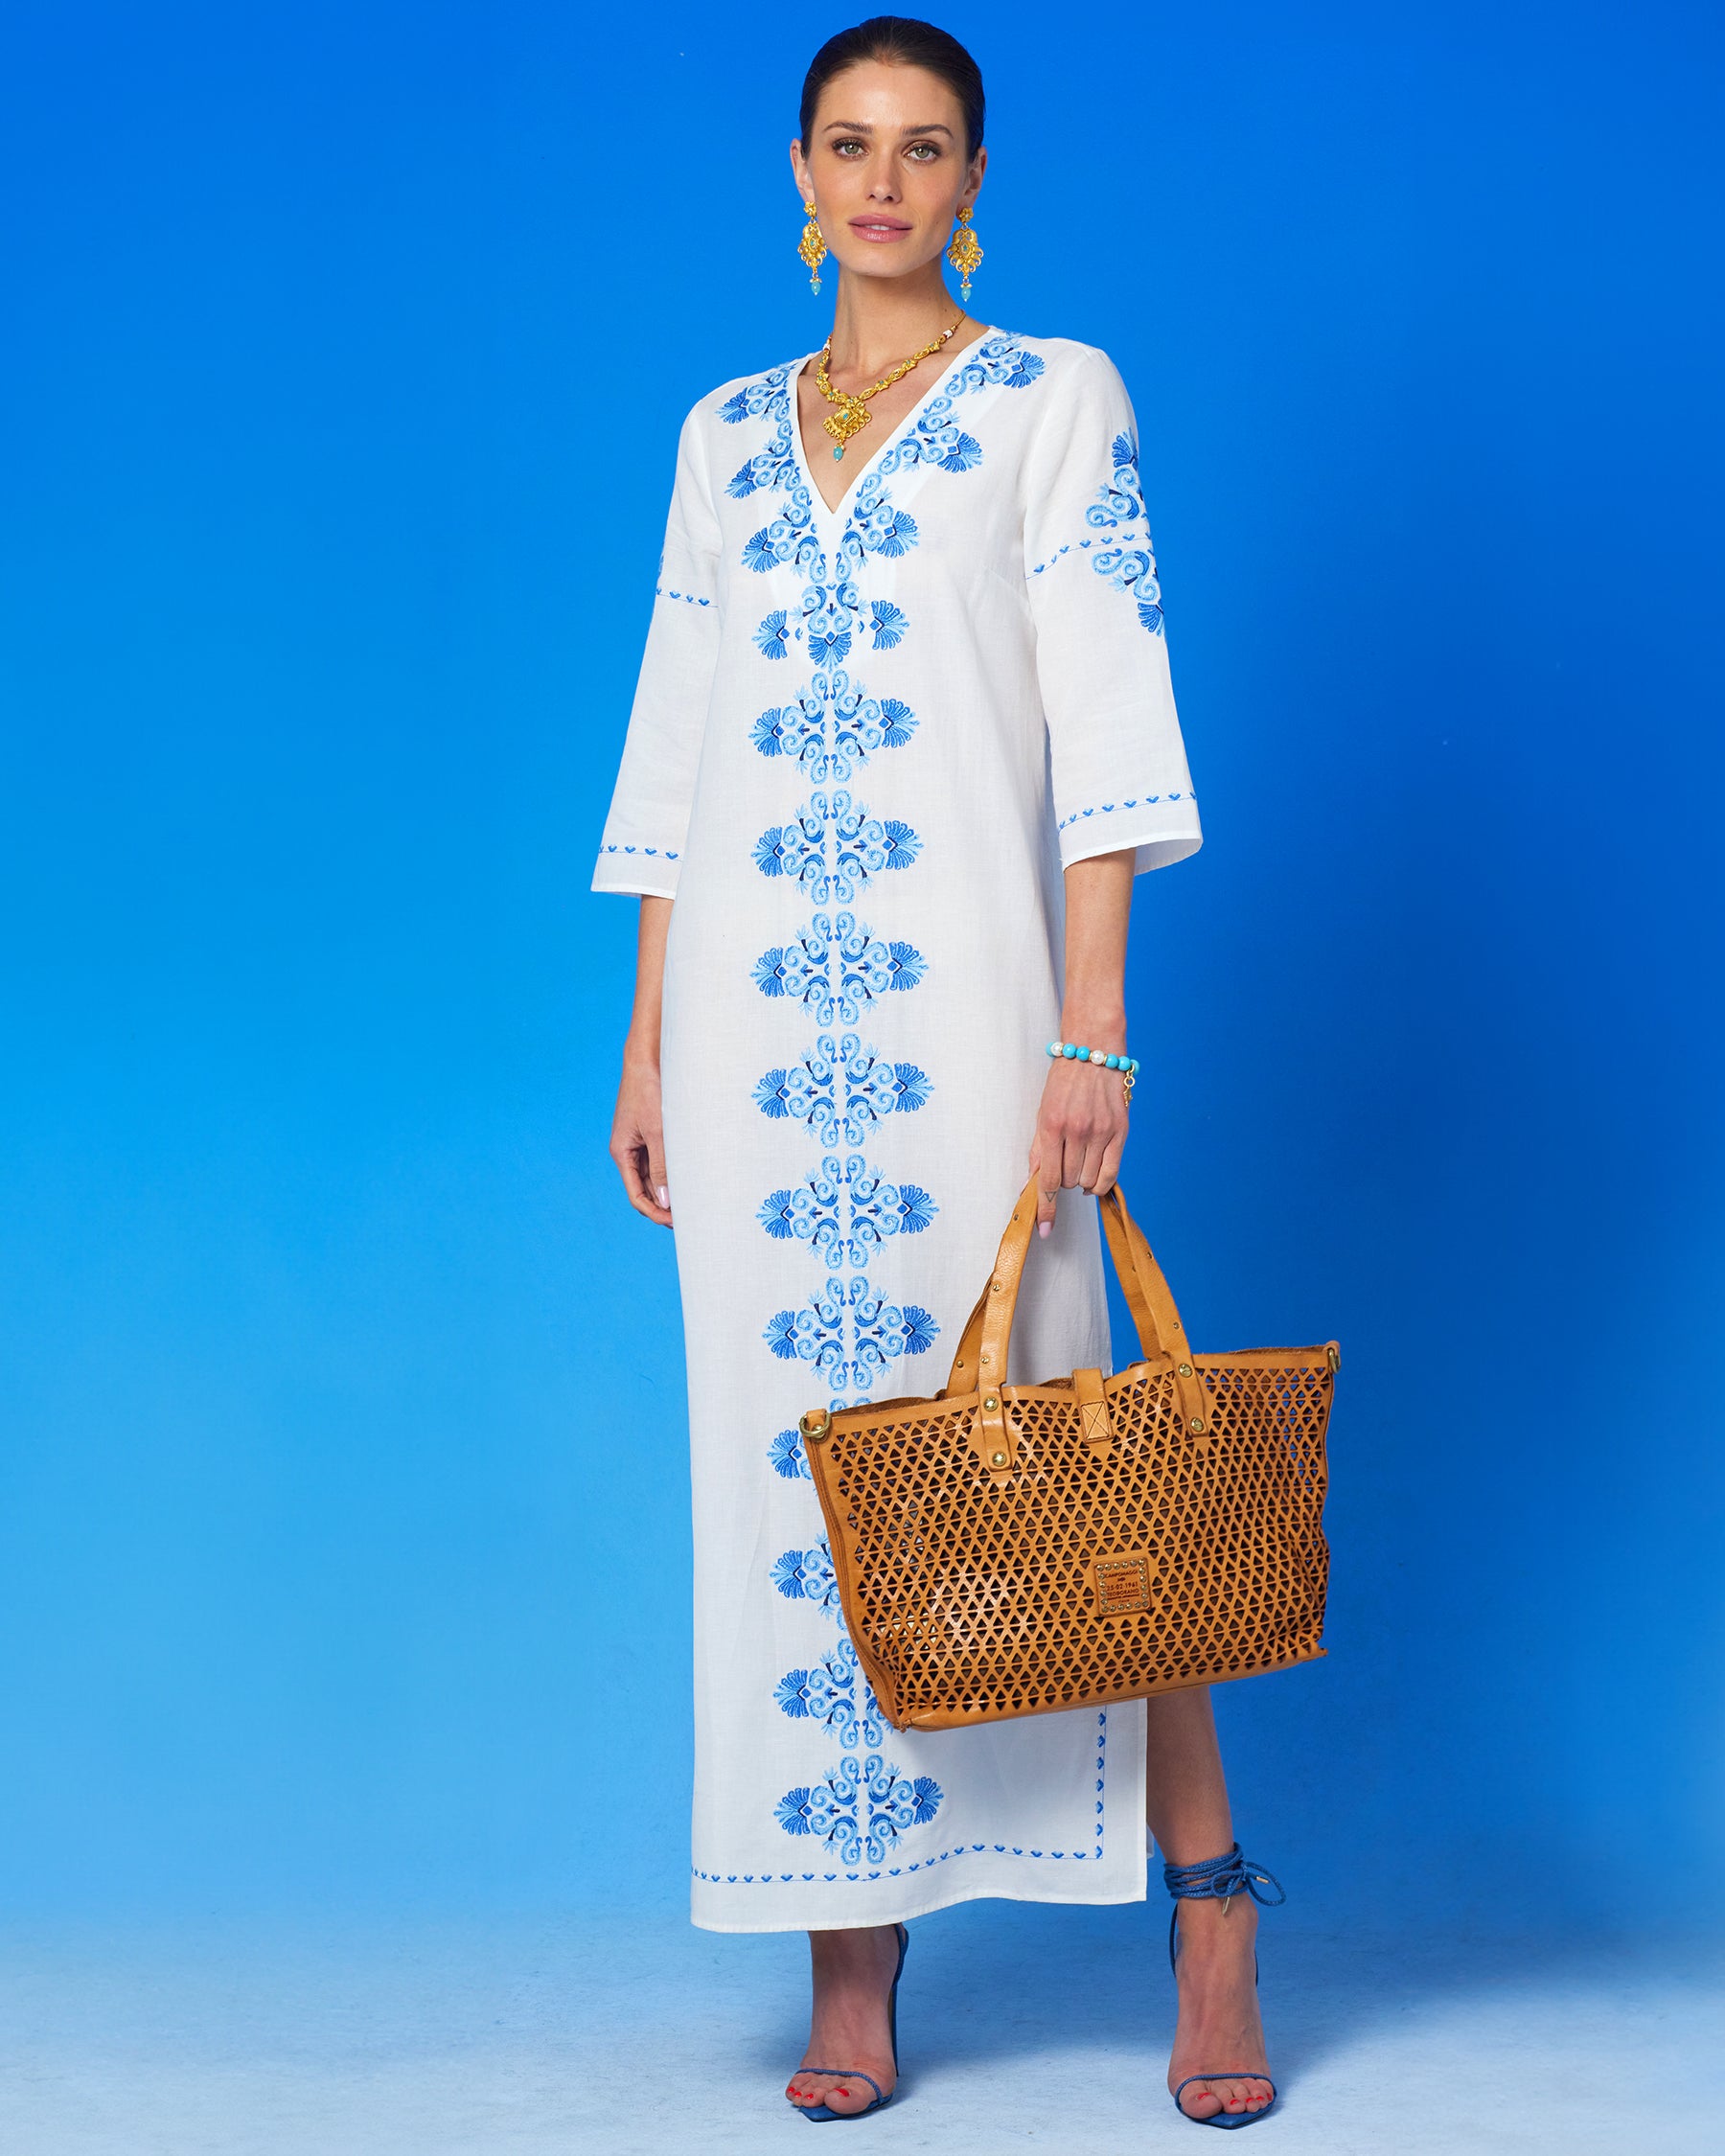 Menorca Long Kaftan Dress and Grecian Motif Embroidery-Front view with Campomaggi Leather Tote